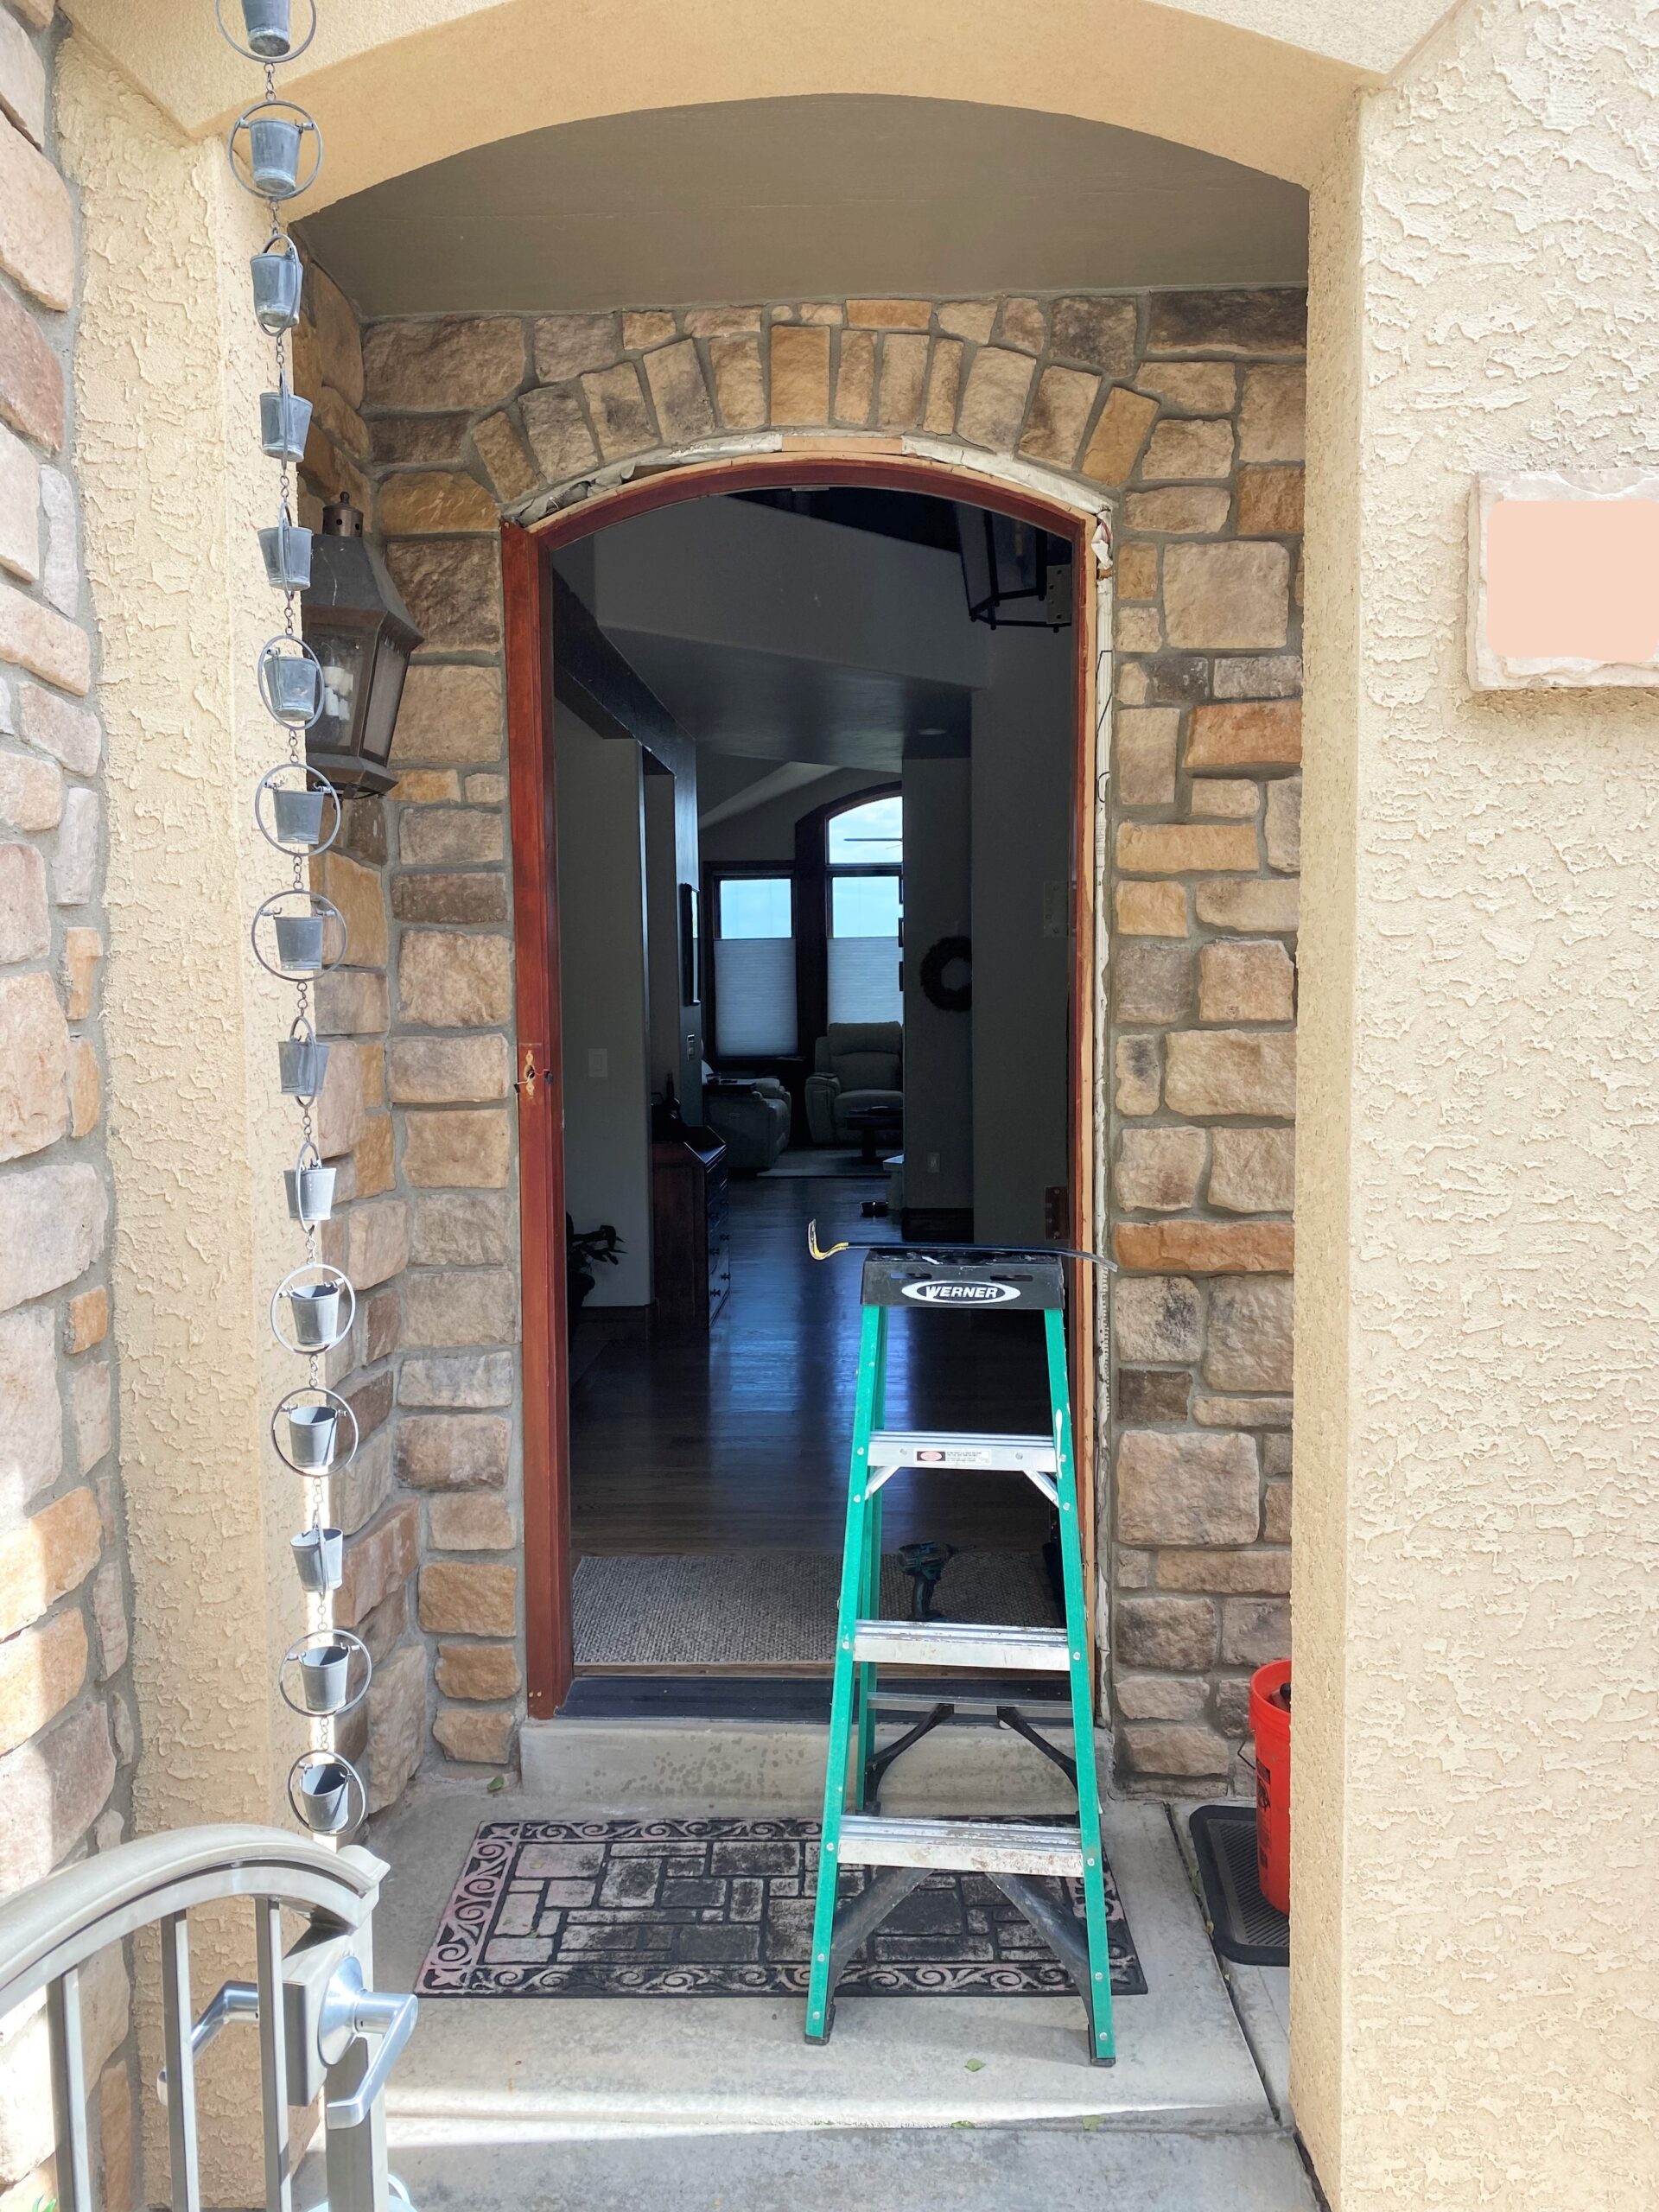 DURING Arched doorways require an exact fit, especially in a stone wall like this entry door.